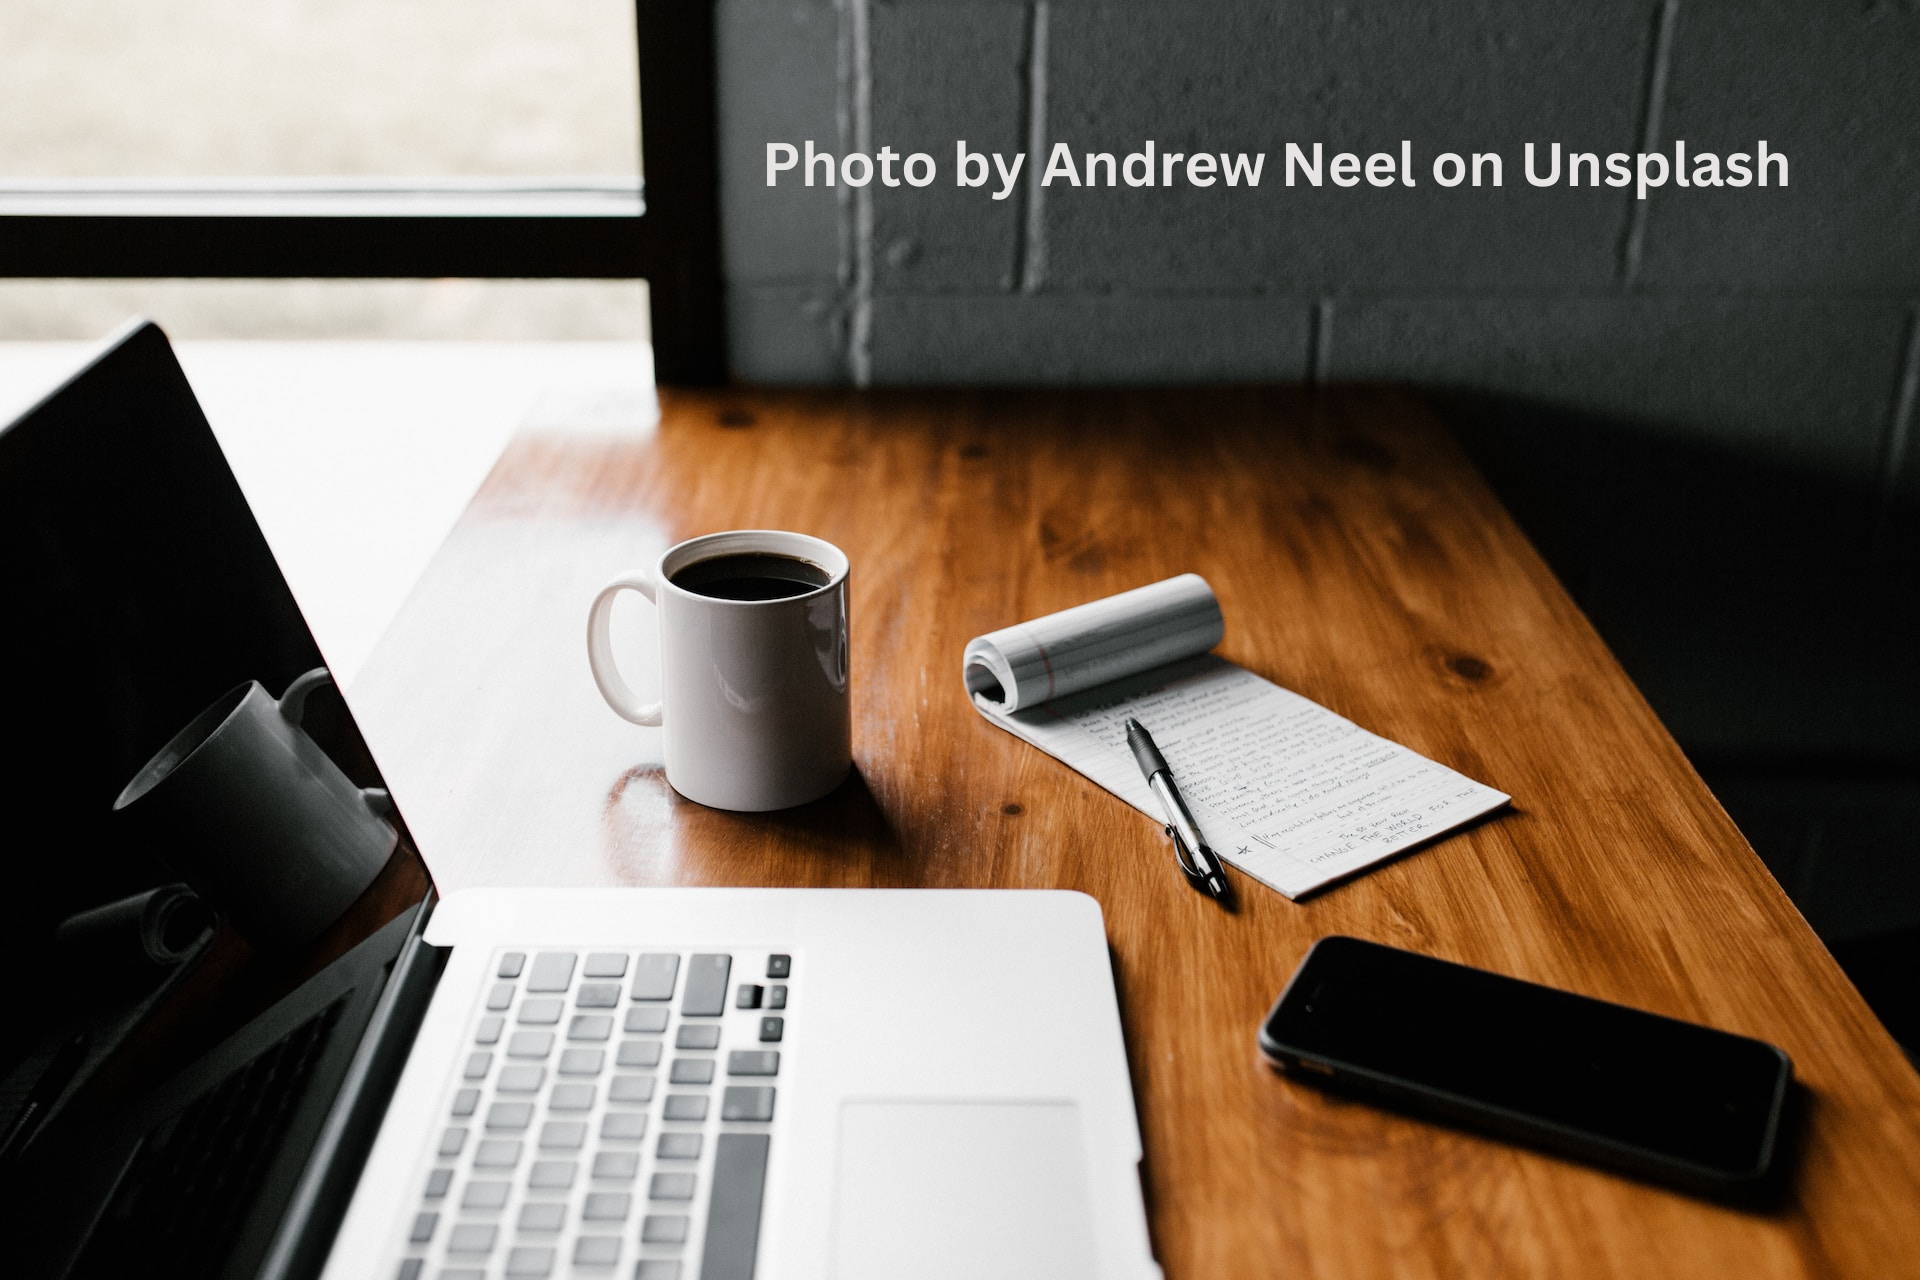 A laptop, coffee cup, cell phone, and note pad sitting on a wooden table. With the words, "Photo by Andrew Neel on Unsplash" in the corner.